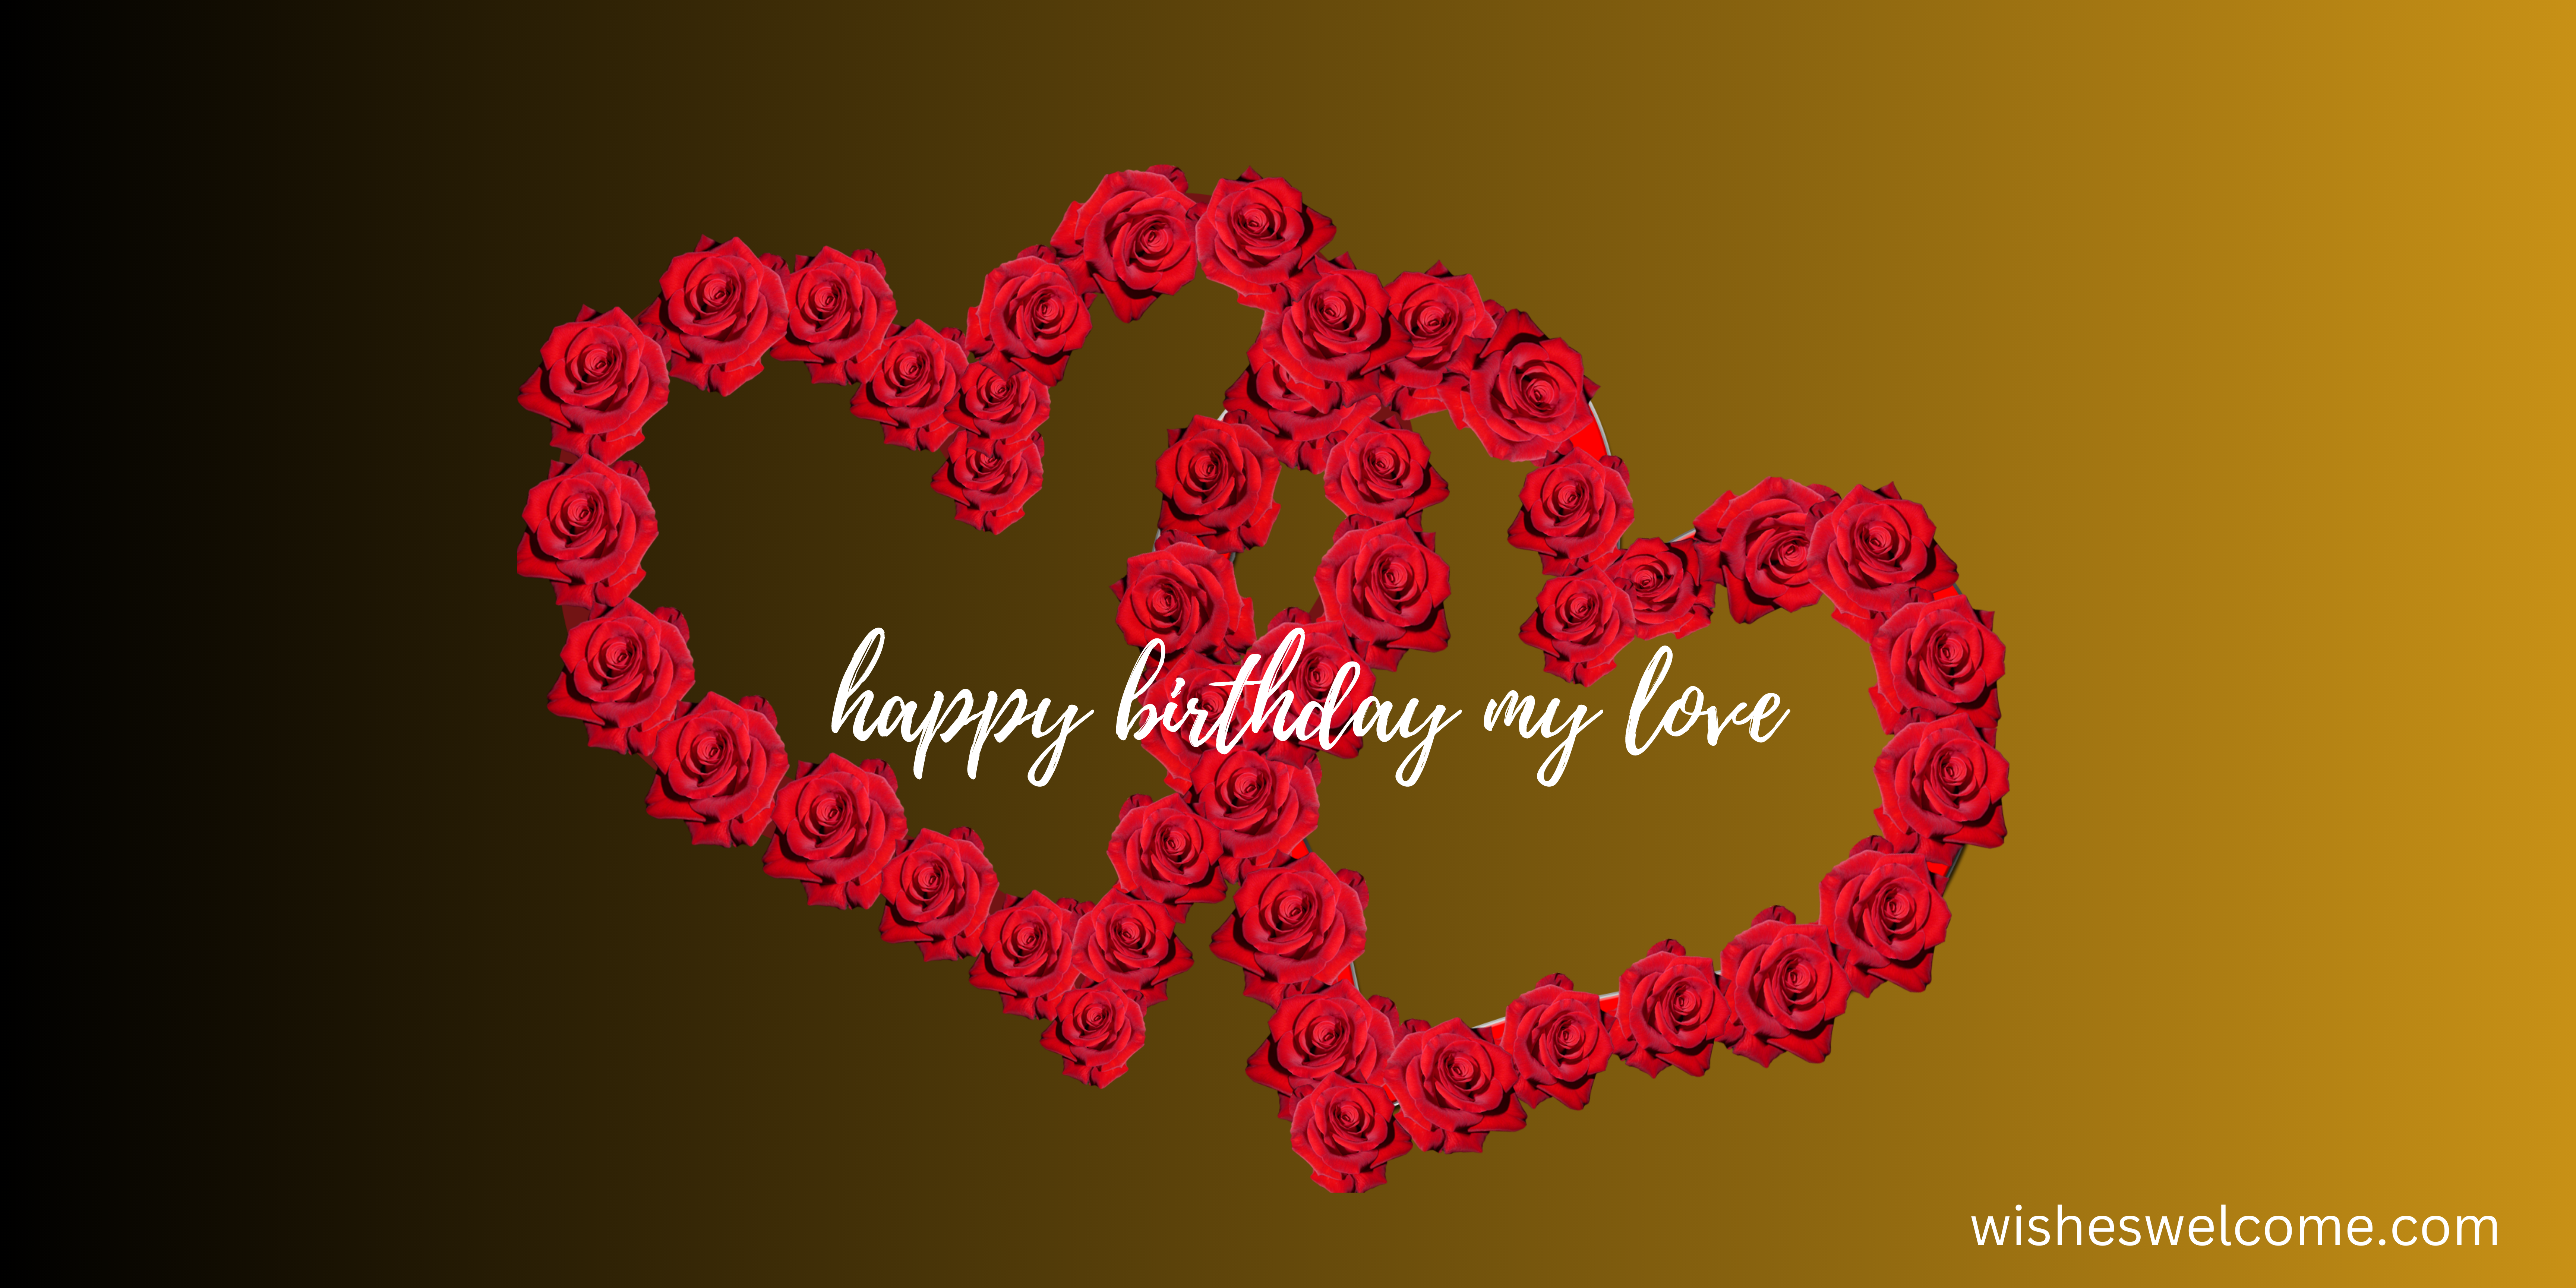 advance birthday wishes for lovers